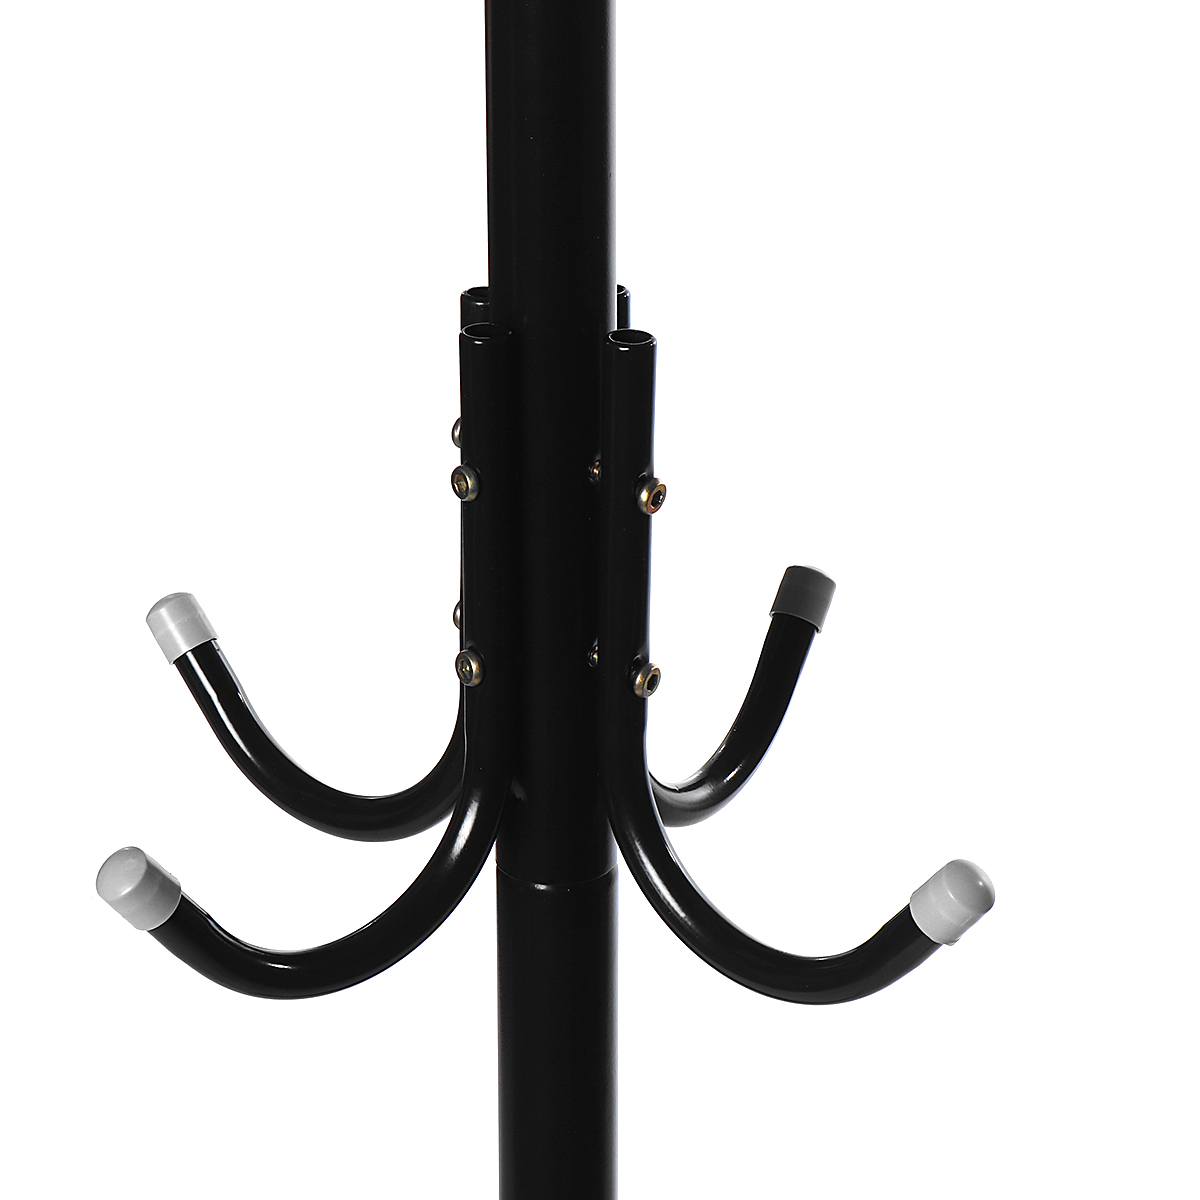 Find 12 Hooks Coat Rack Metal Clothes Hat Bags T shirt Jacket Stand Hook Hanging Pole Floor Rack Tree Holder Organizer Hanger for Sale on Gipsybee.com with cryptocurrencies